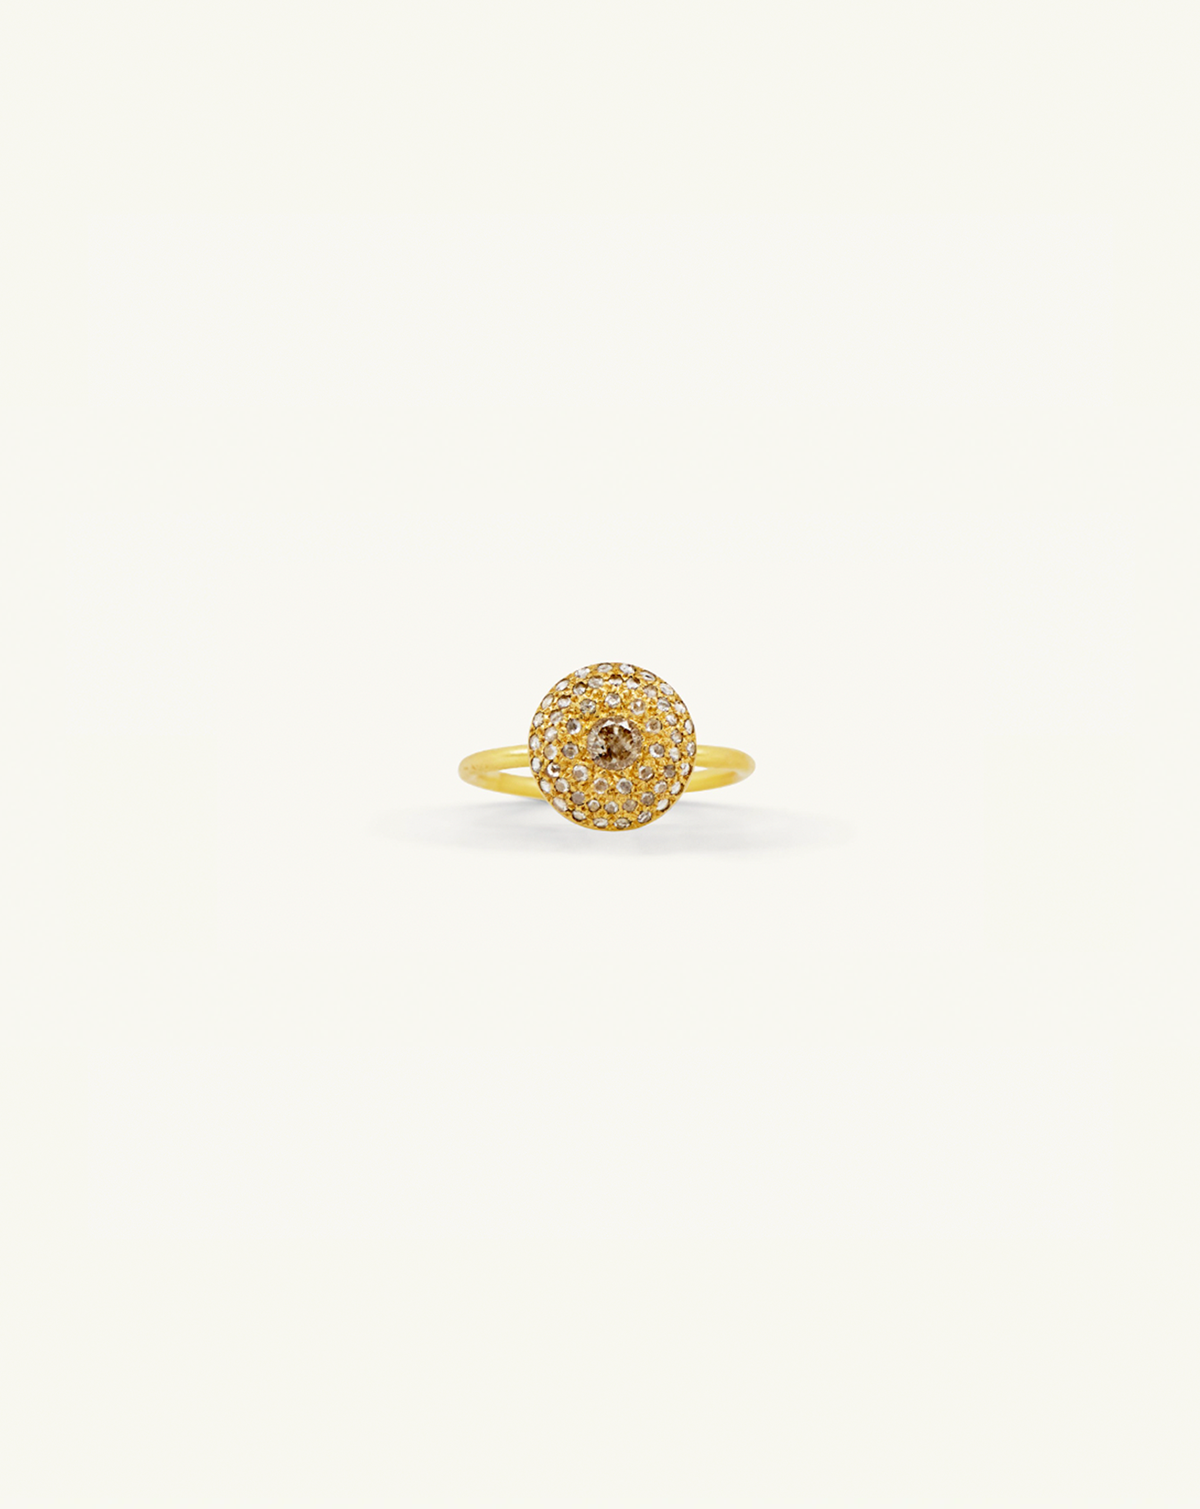 Face on product image of i seira gold pod ring with white diamond pavé